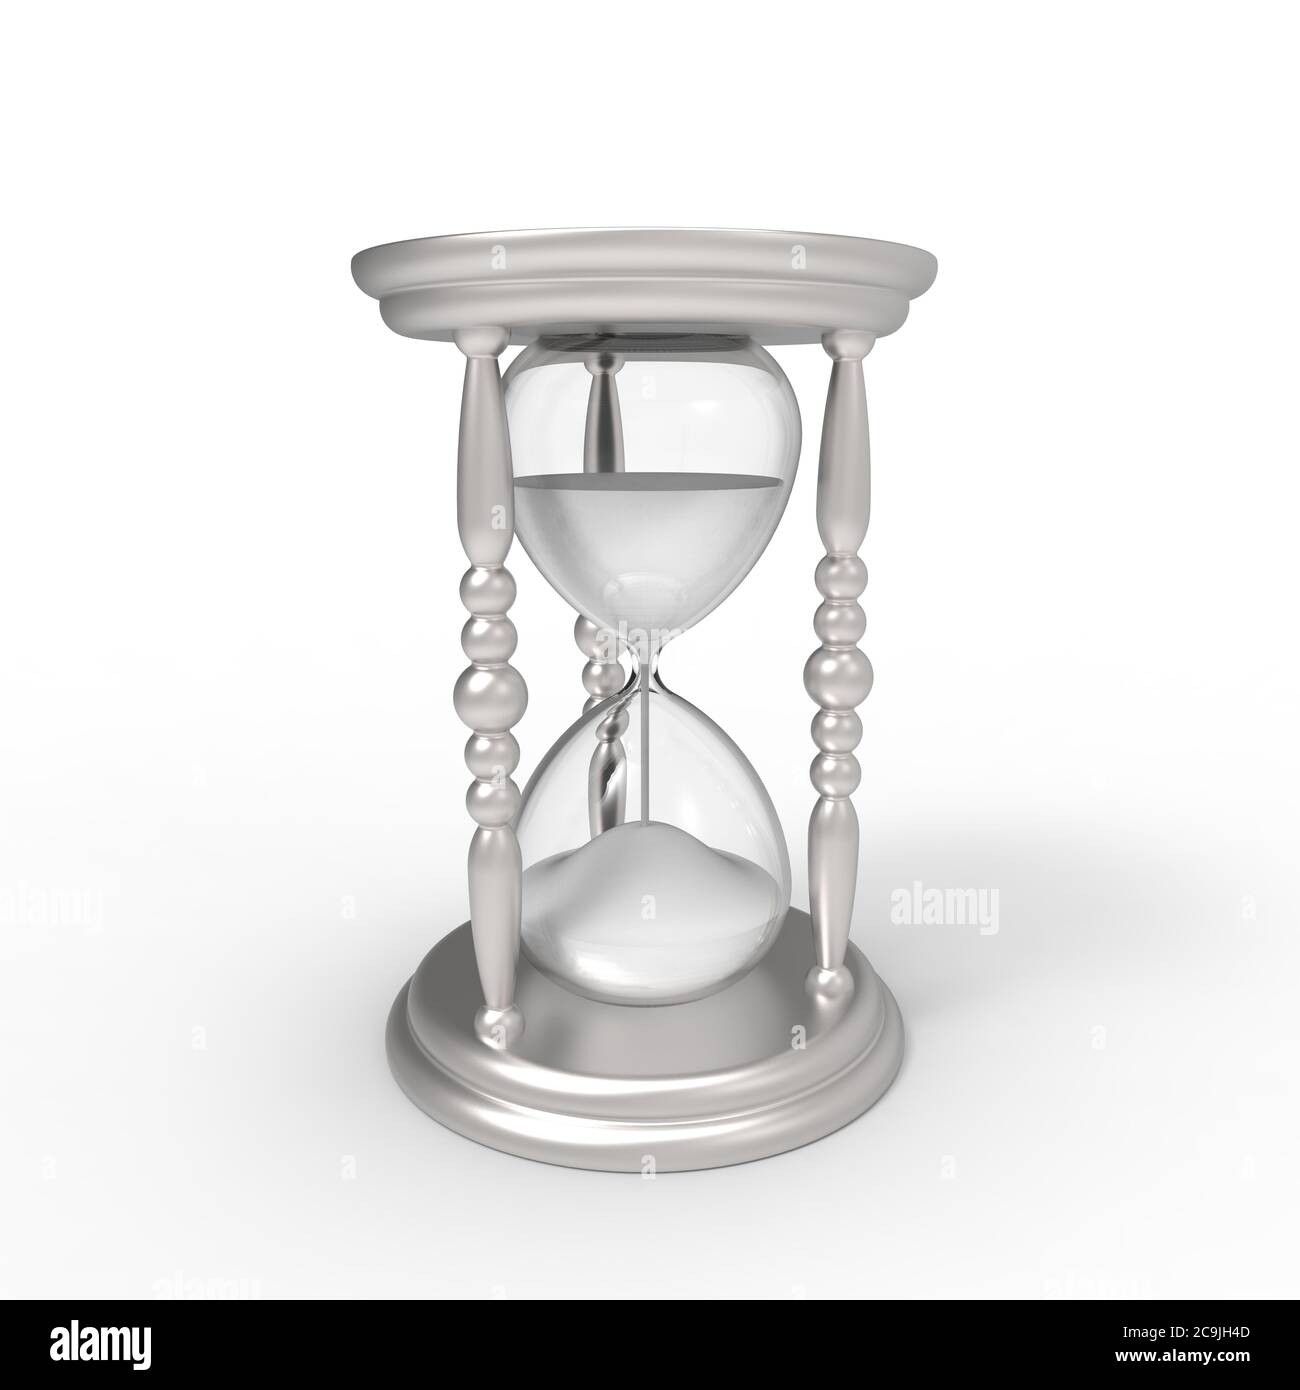 ntique egg timer hourglass with in a silver coloured frame and white sand on a white background Stock Photo